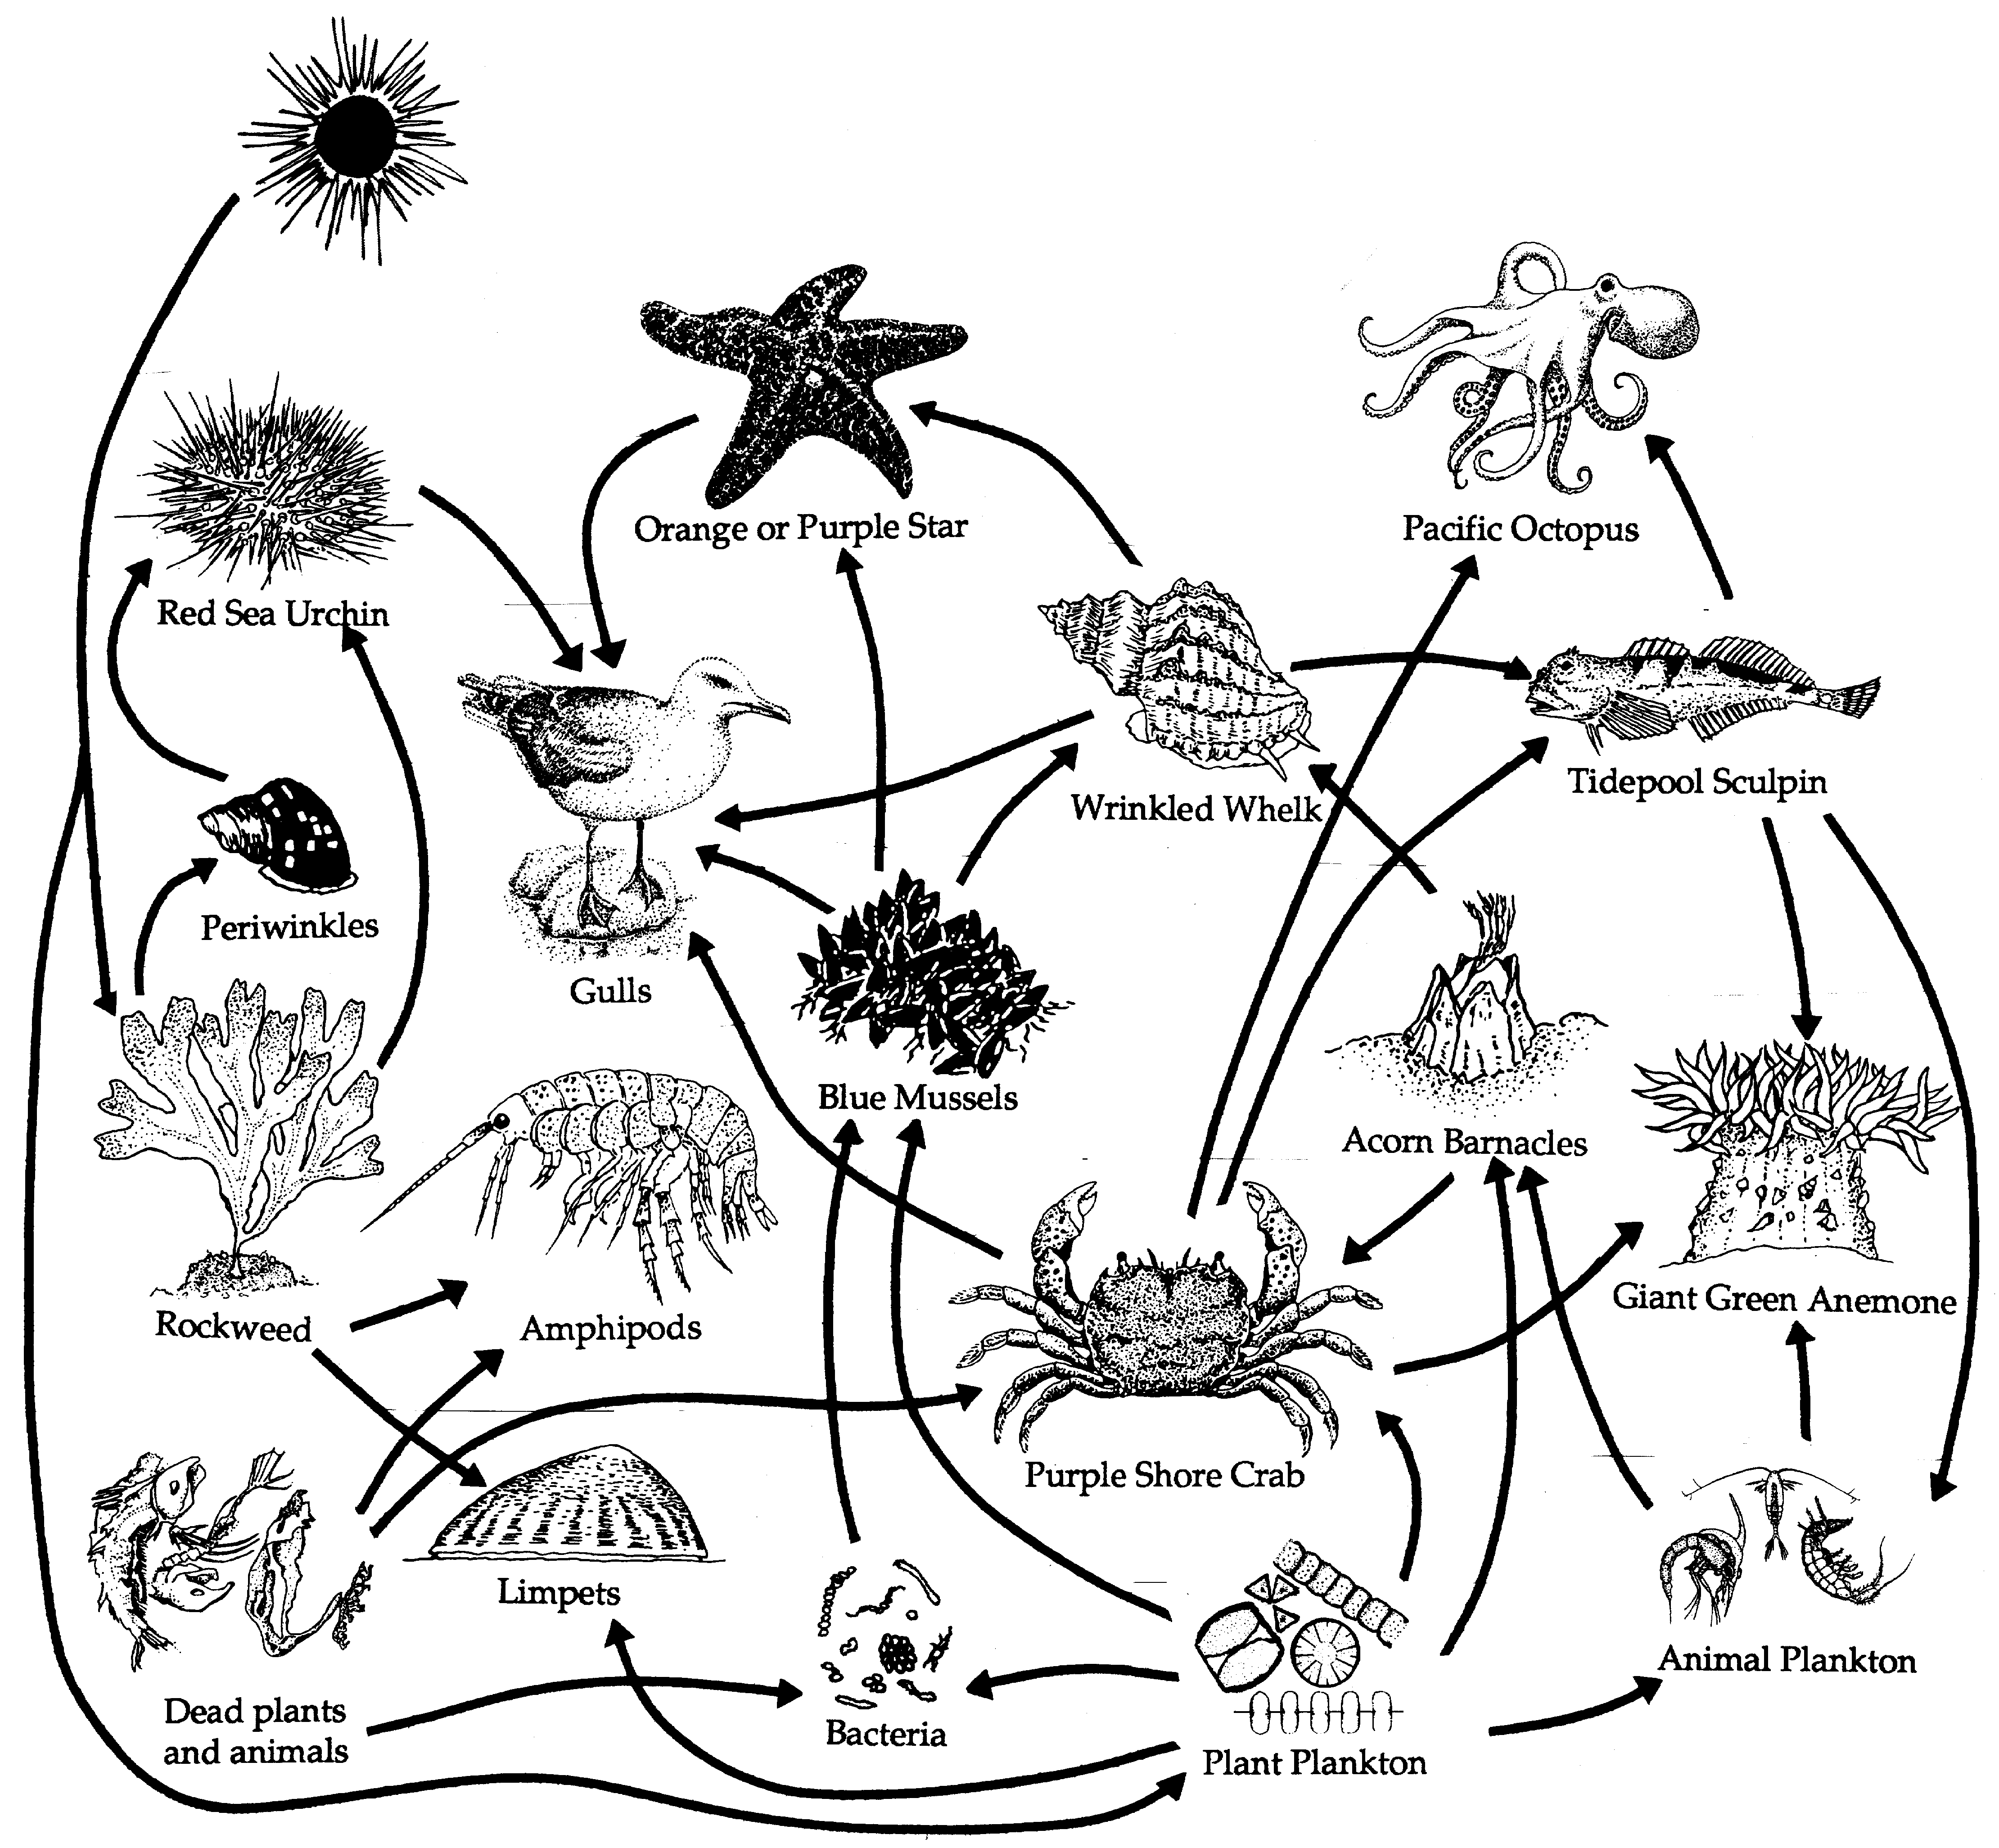 food web for rocky shore (new)